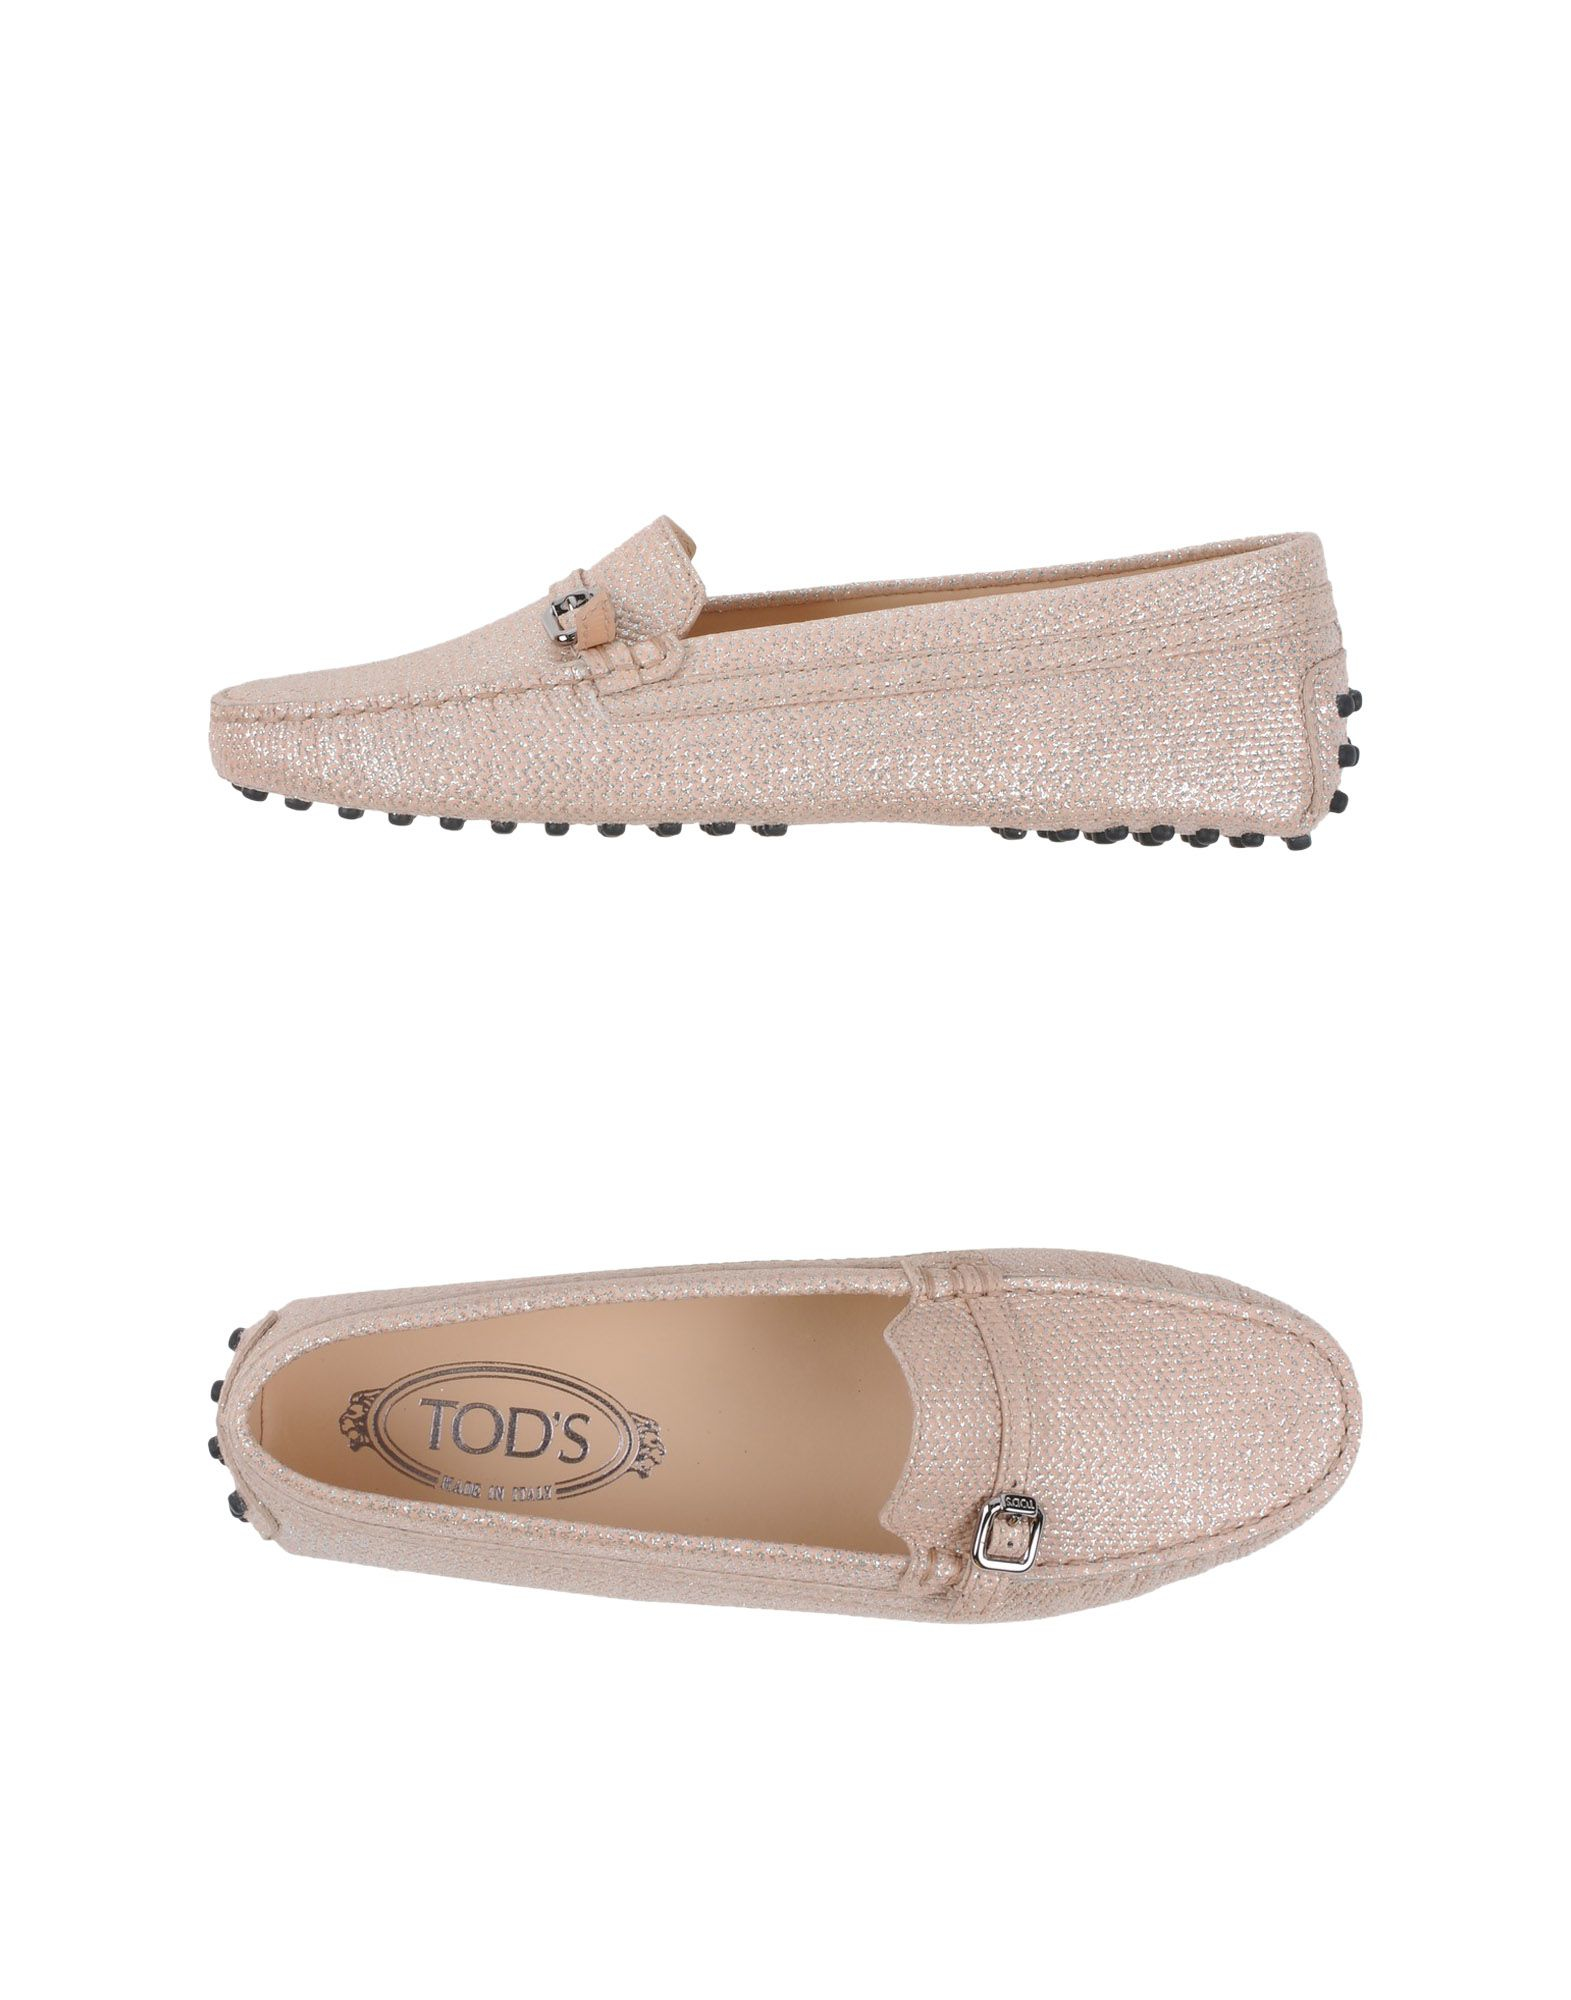 Tod's Moccasins in Pink (Light pink) - Save 39% | Lyst